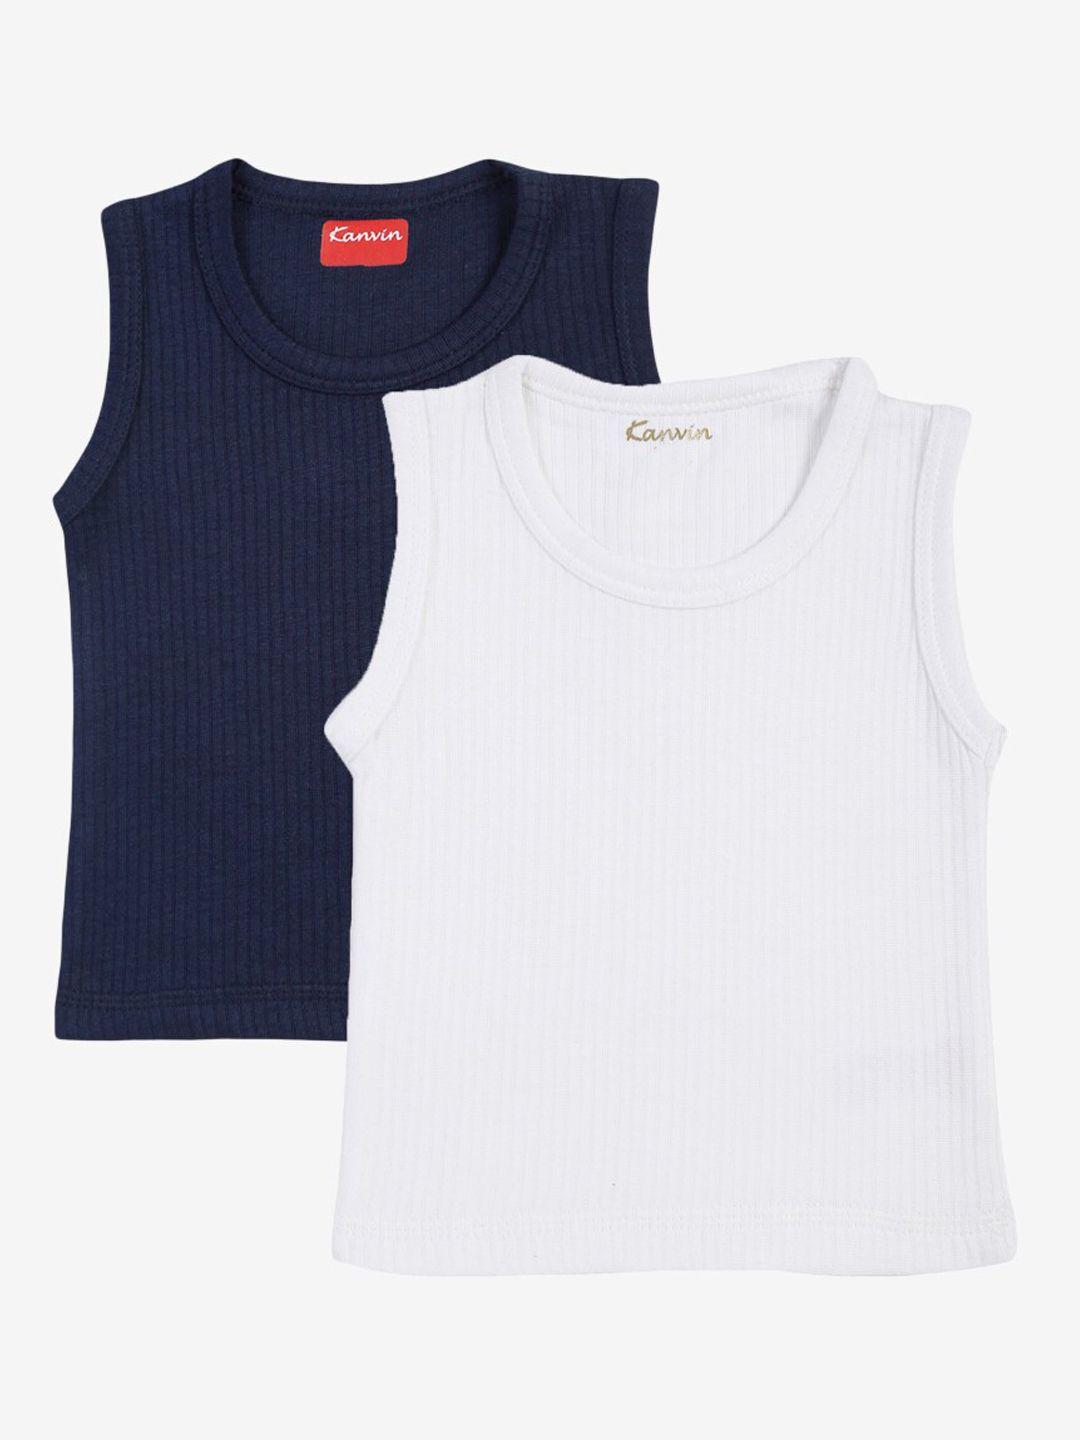 kanvin boys pack of 2 navy blue & white ribbed cotton thermal tops